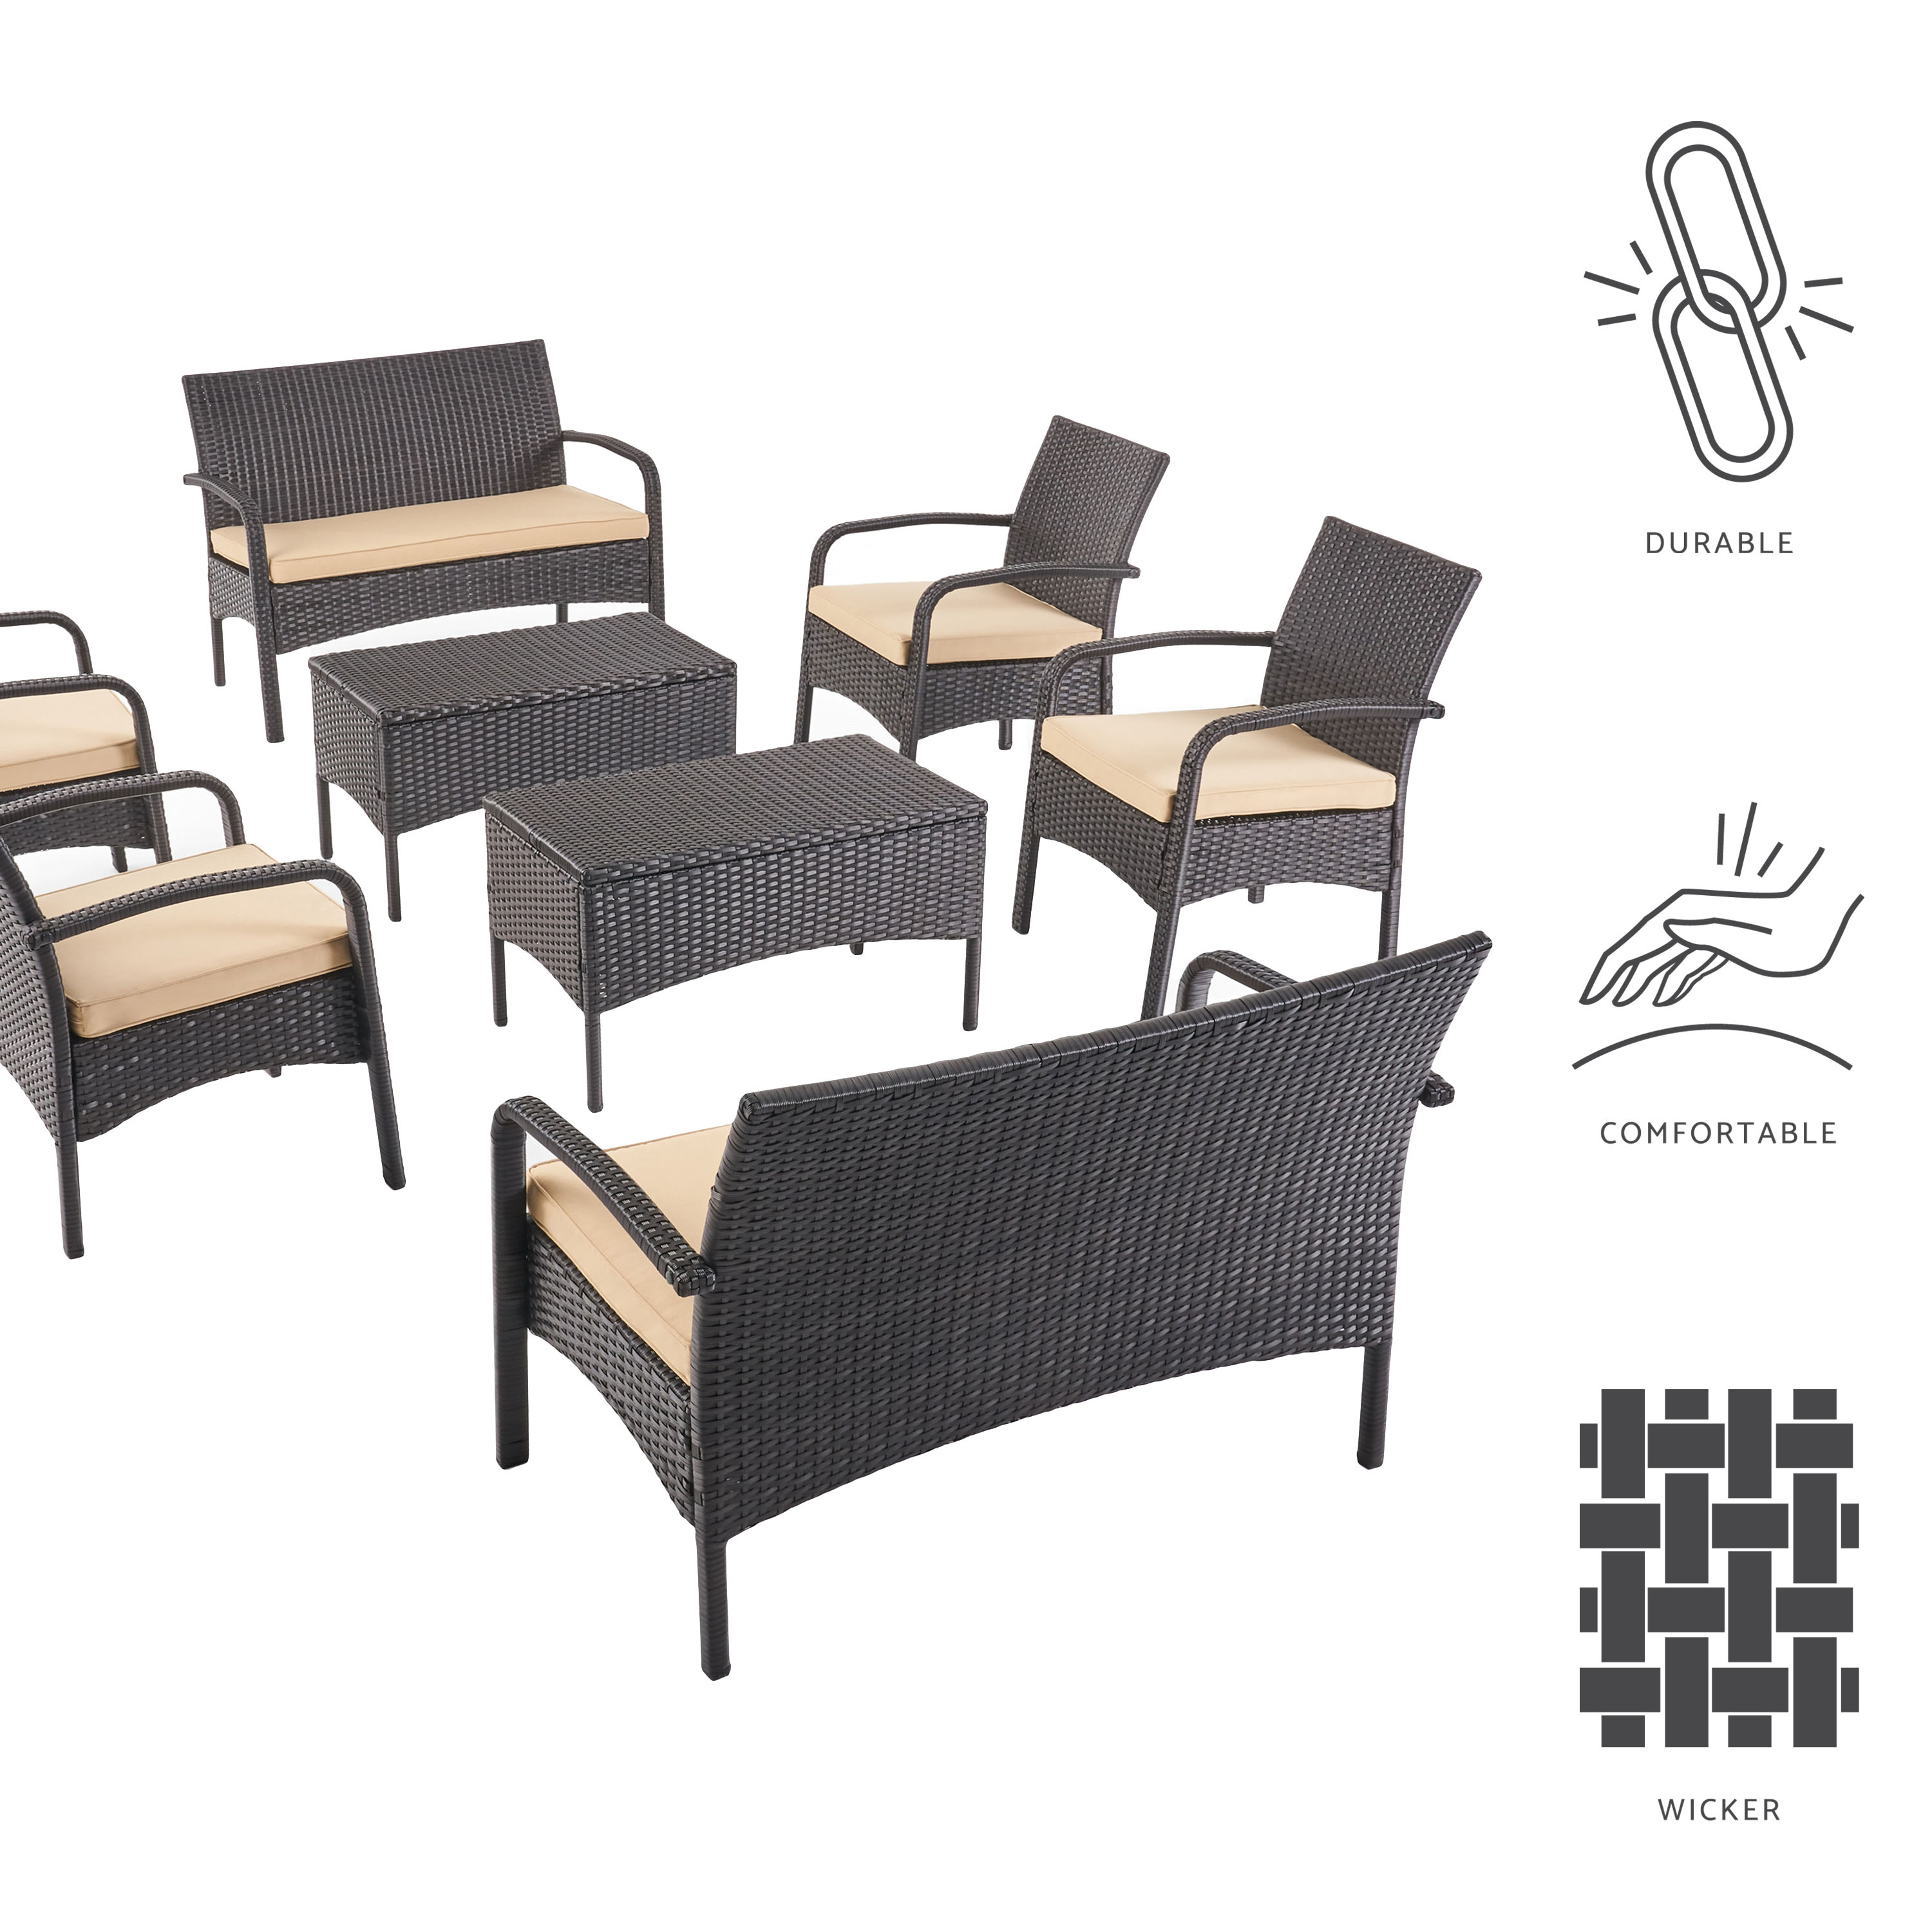 Carmela Outdoor 8 Seater Wicker Chat Set with Cushions, Brown and Tan - image 2 of 11